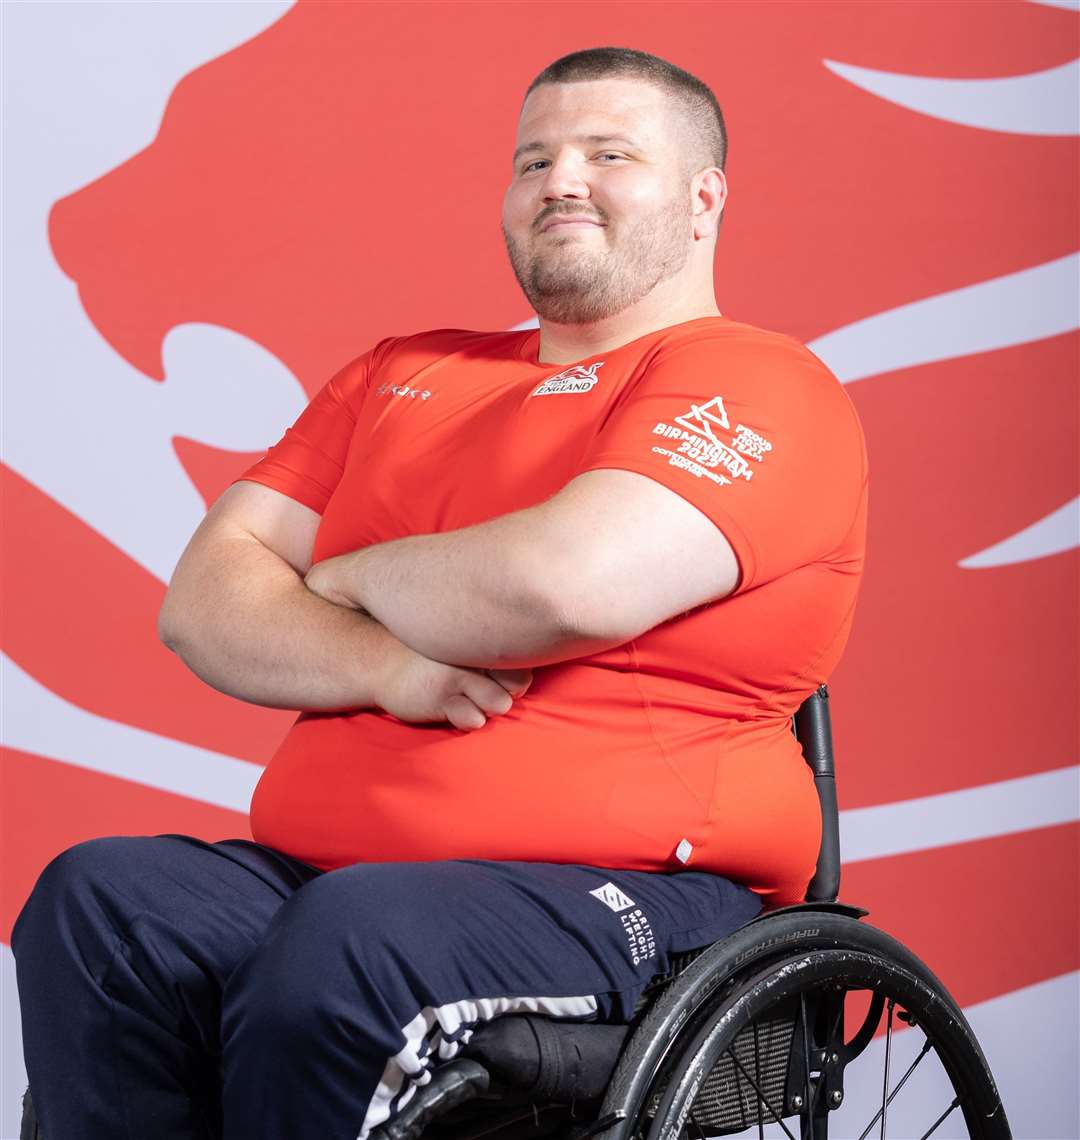 Dartford's Liam McGarry will make his Commonwealth Games debut in the para powerlifting. Picture: Team England